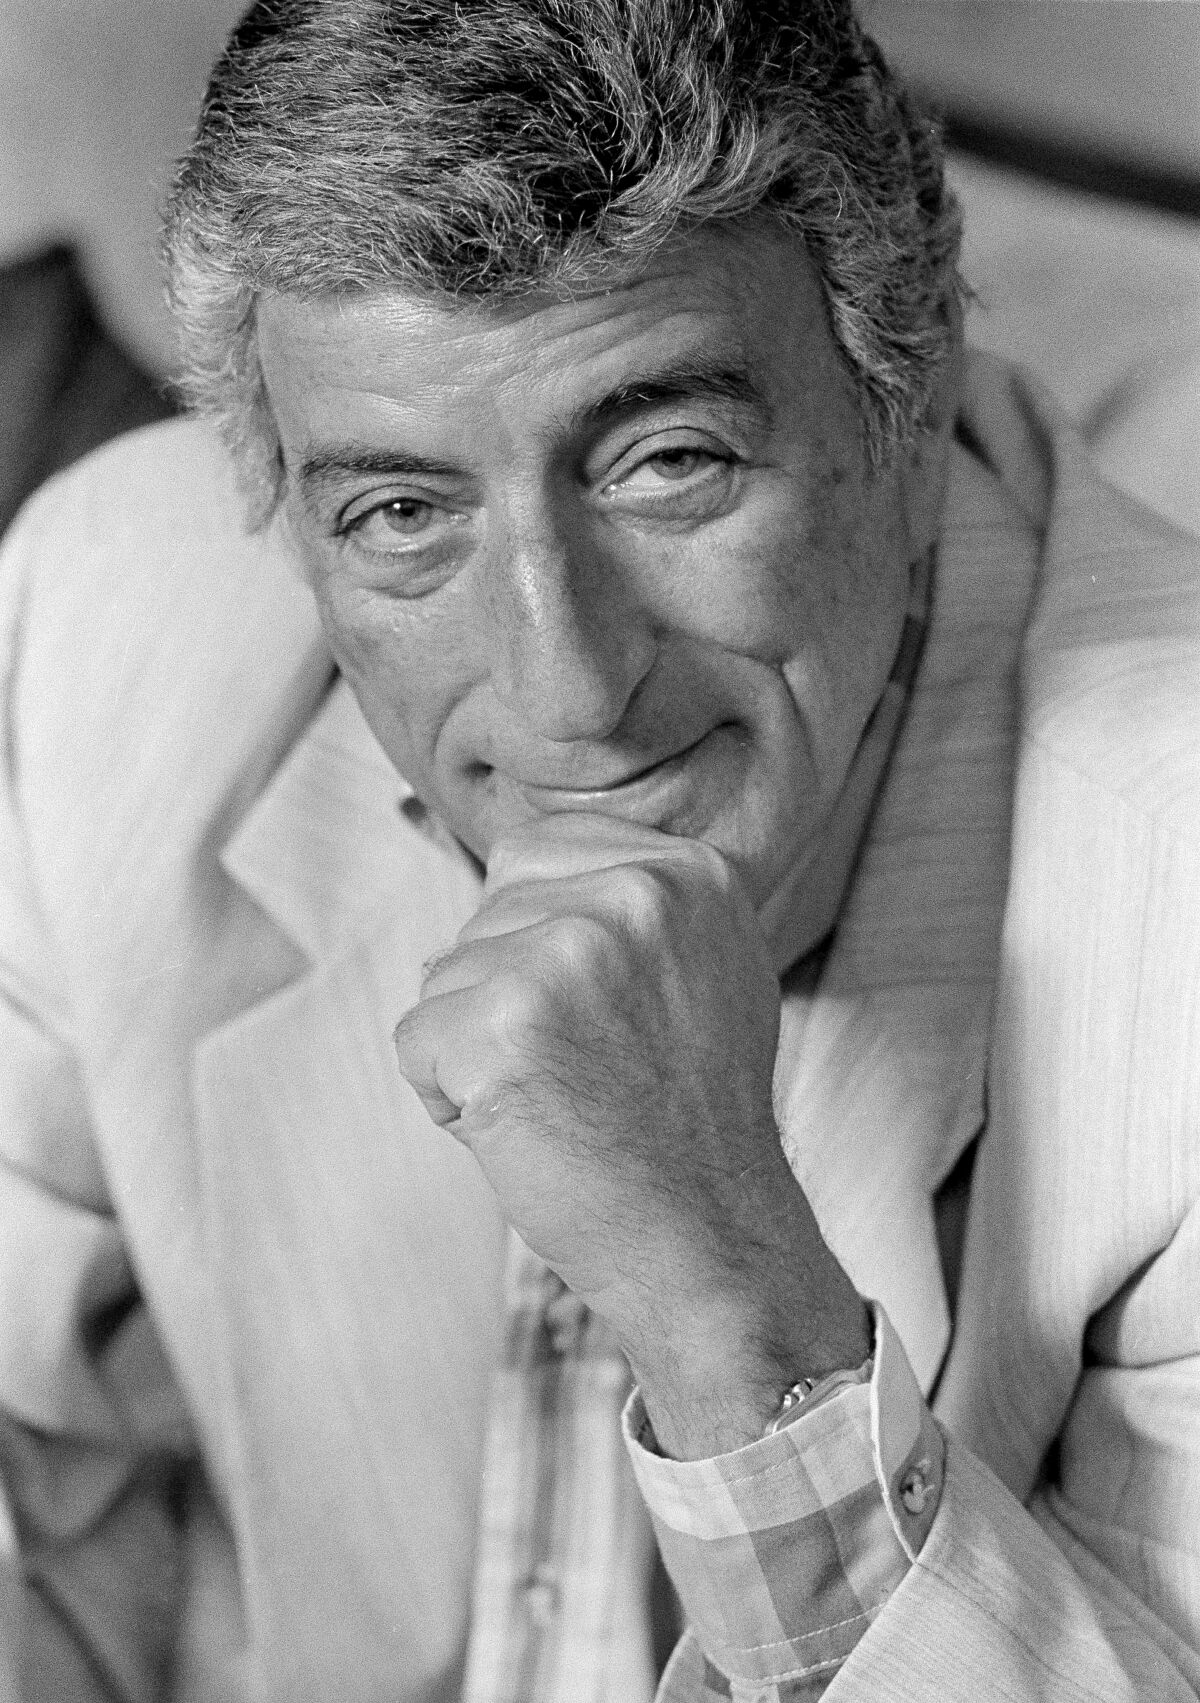 A vertical black-and-white frame of Tony Bennett looking at the camera while resting his chin on his left fist, smiling